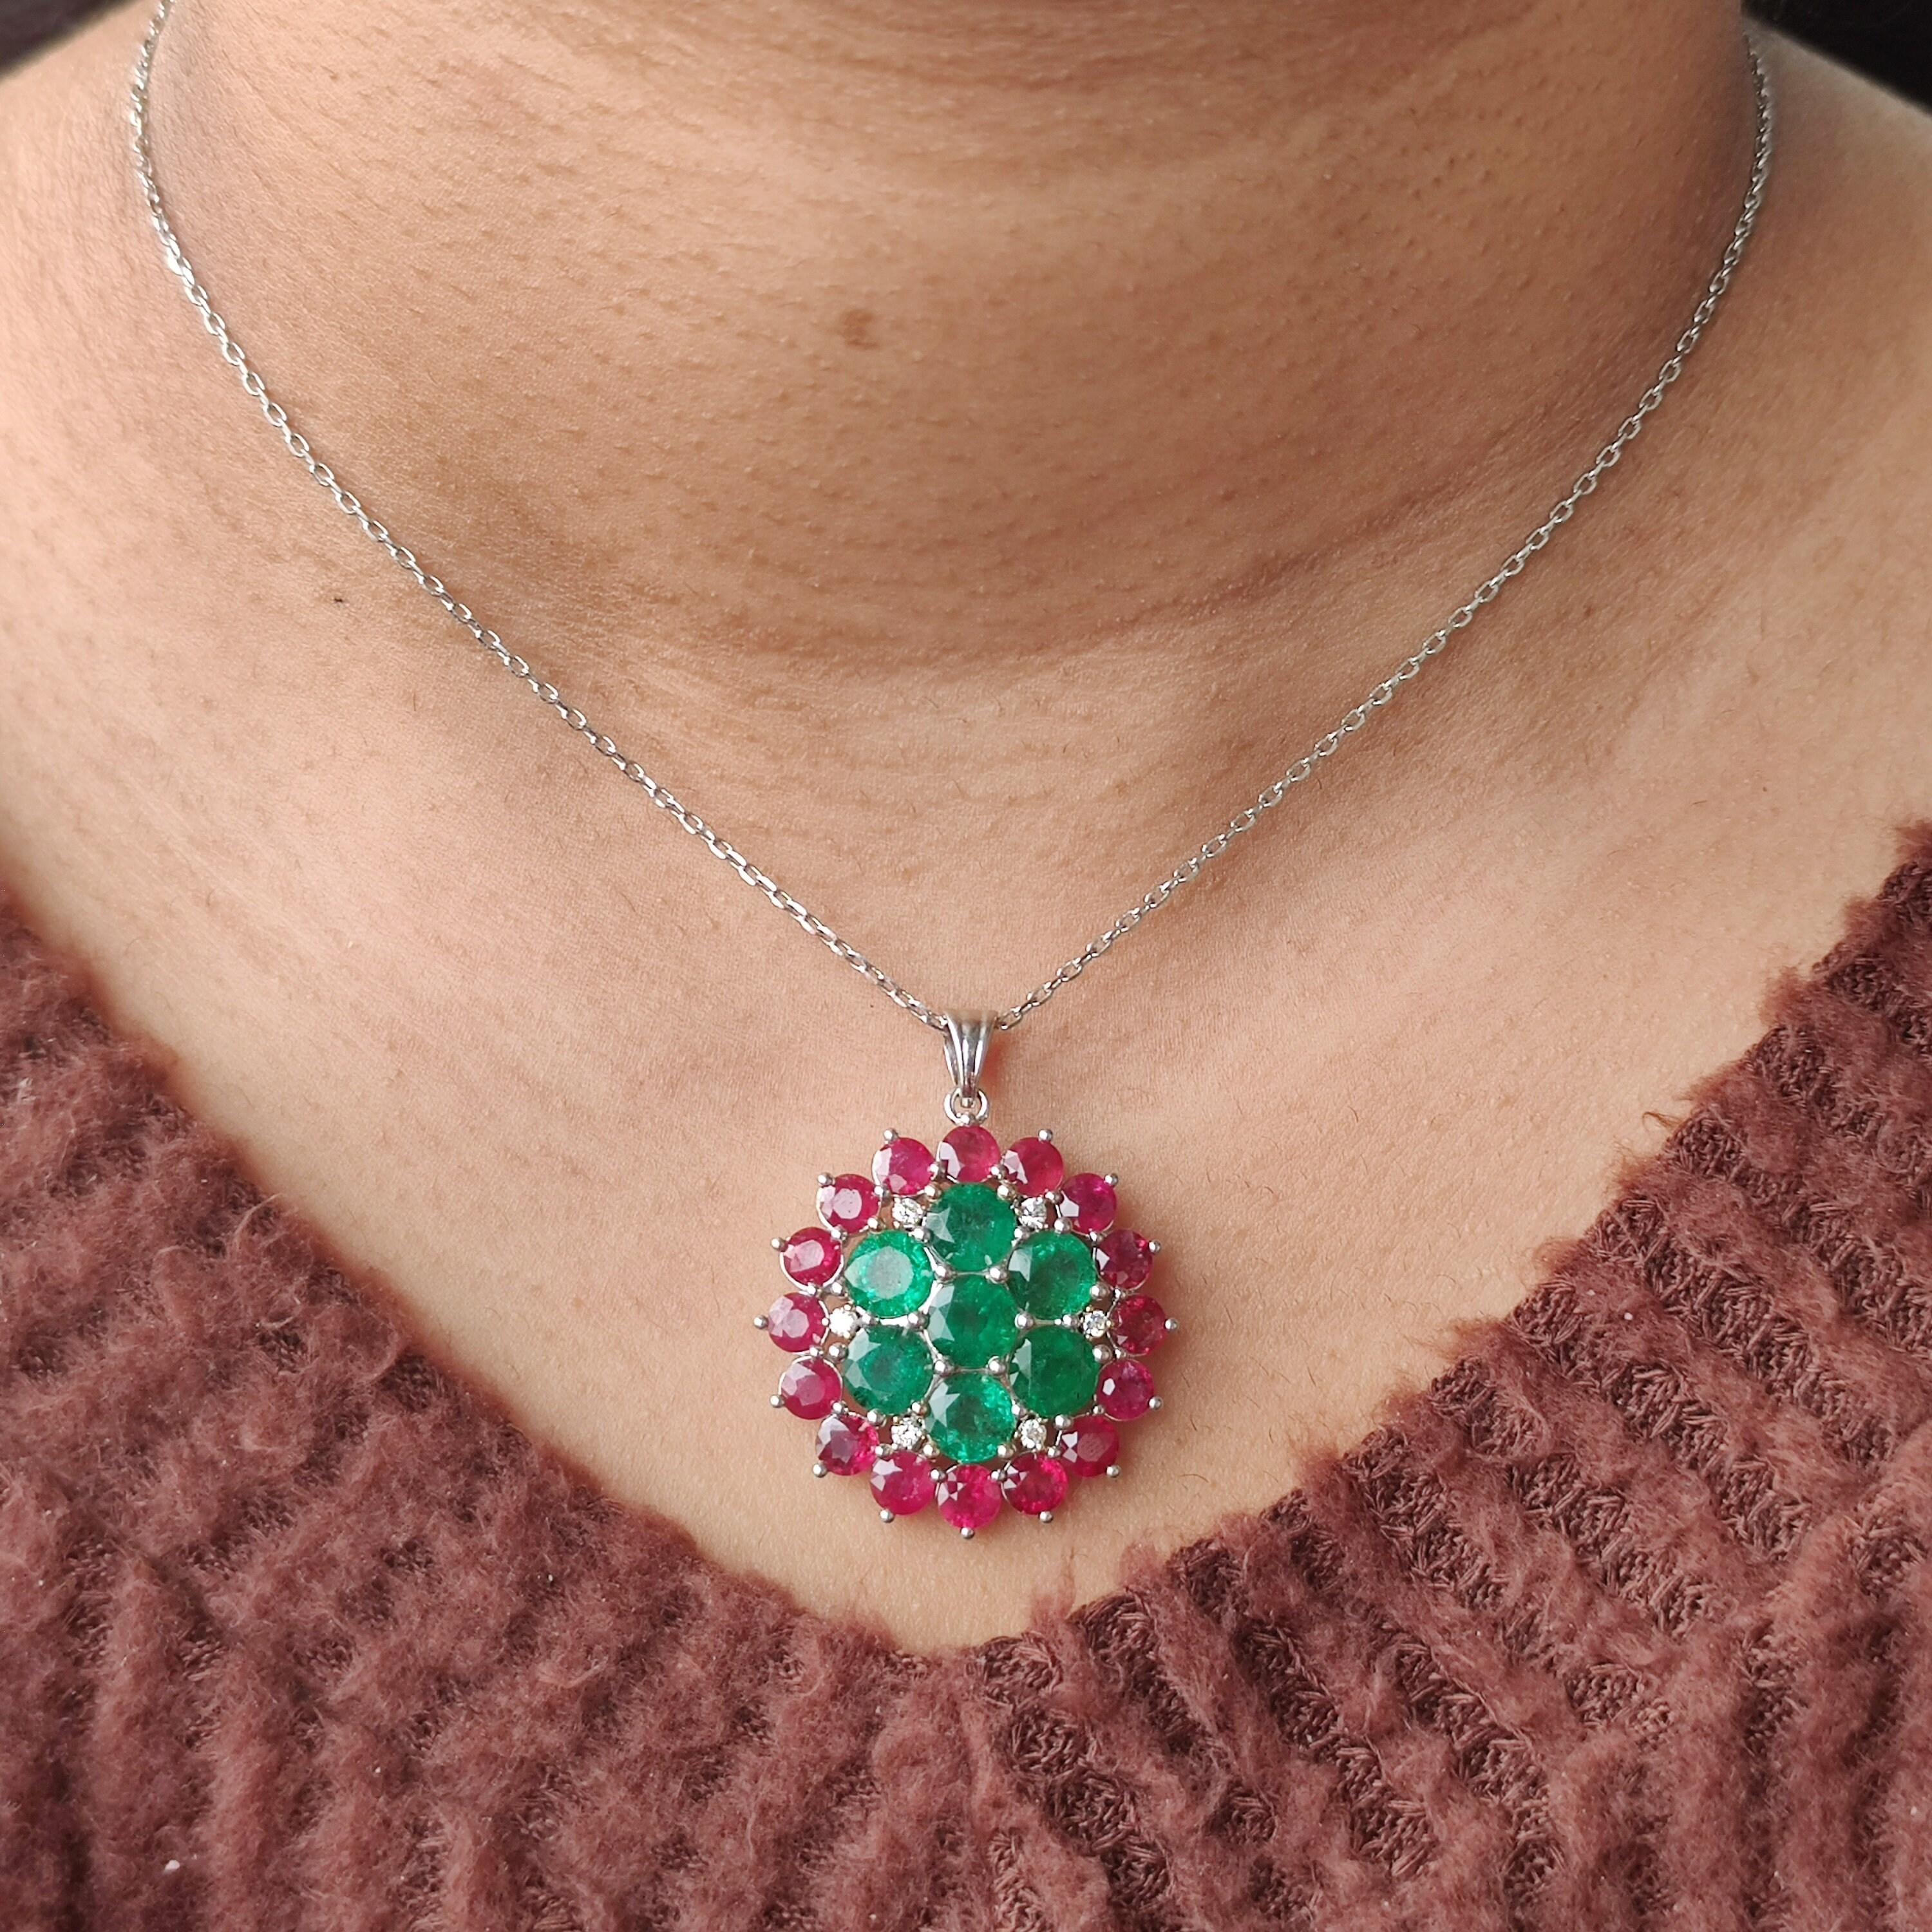 7.41 Ct Emerald, 6.94 Ct Ruby & 0.2 Ct Diamond studded Statement Pendant For Sale 5